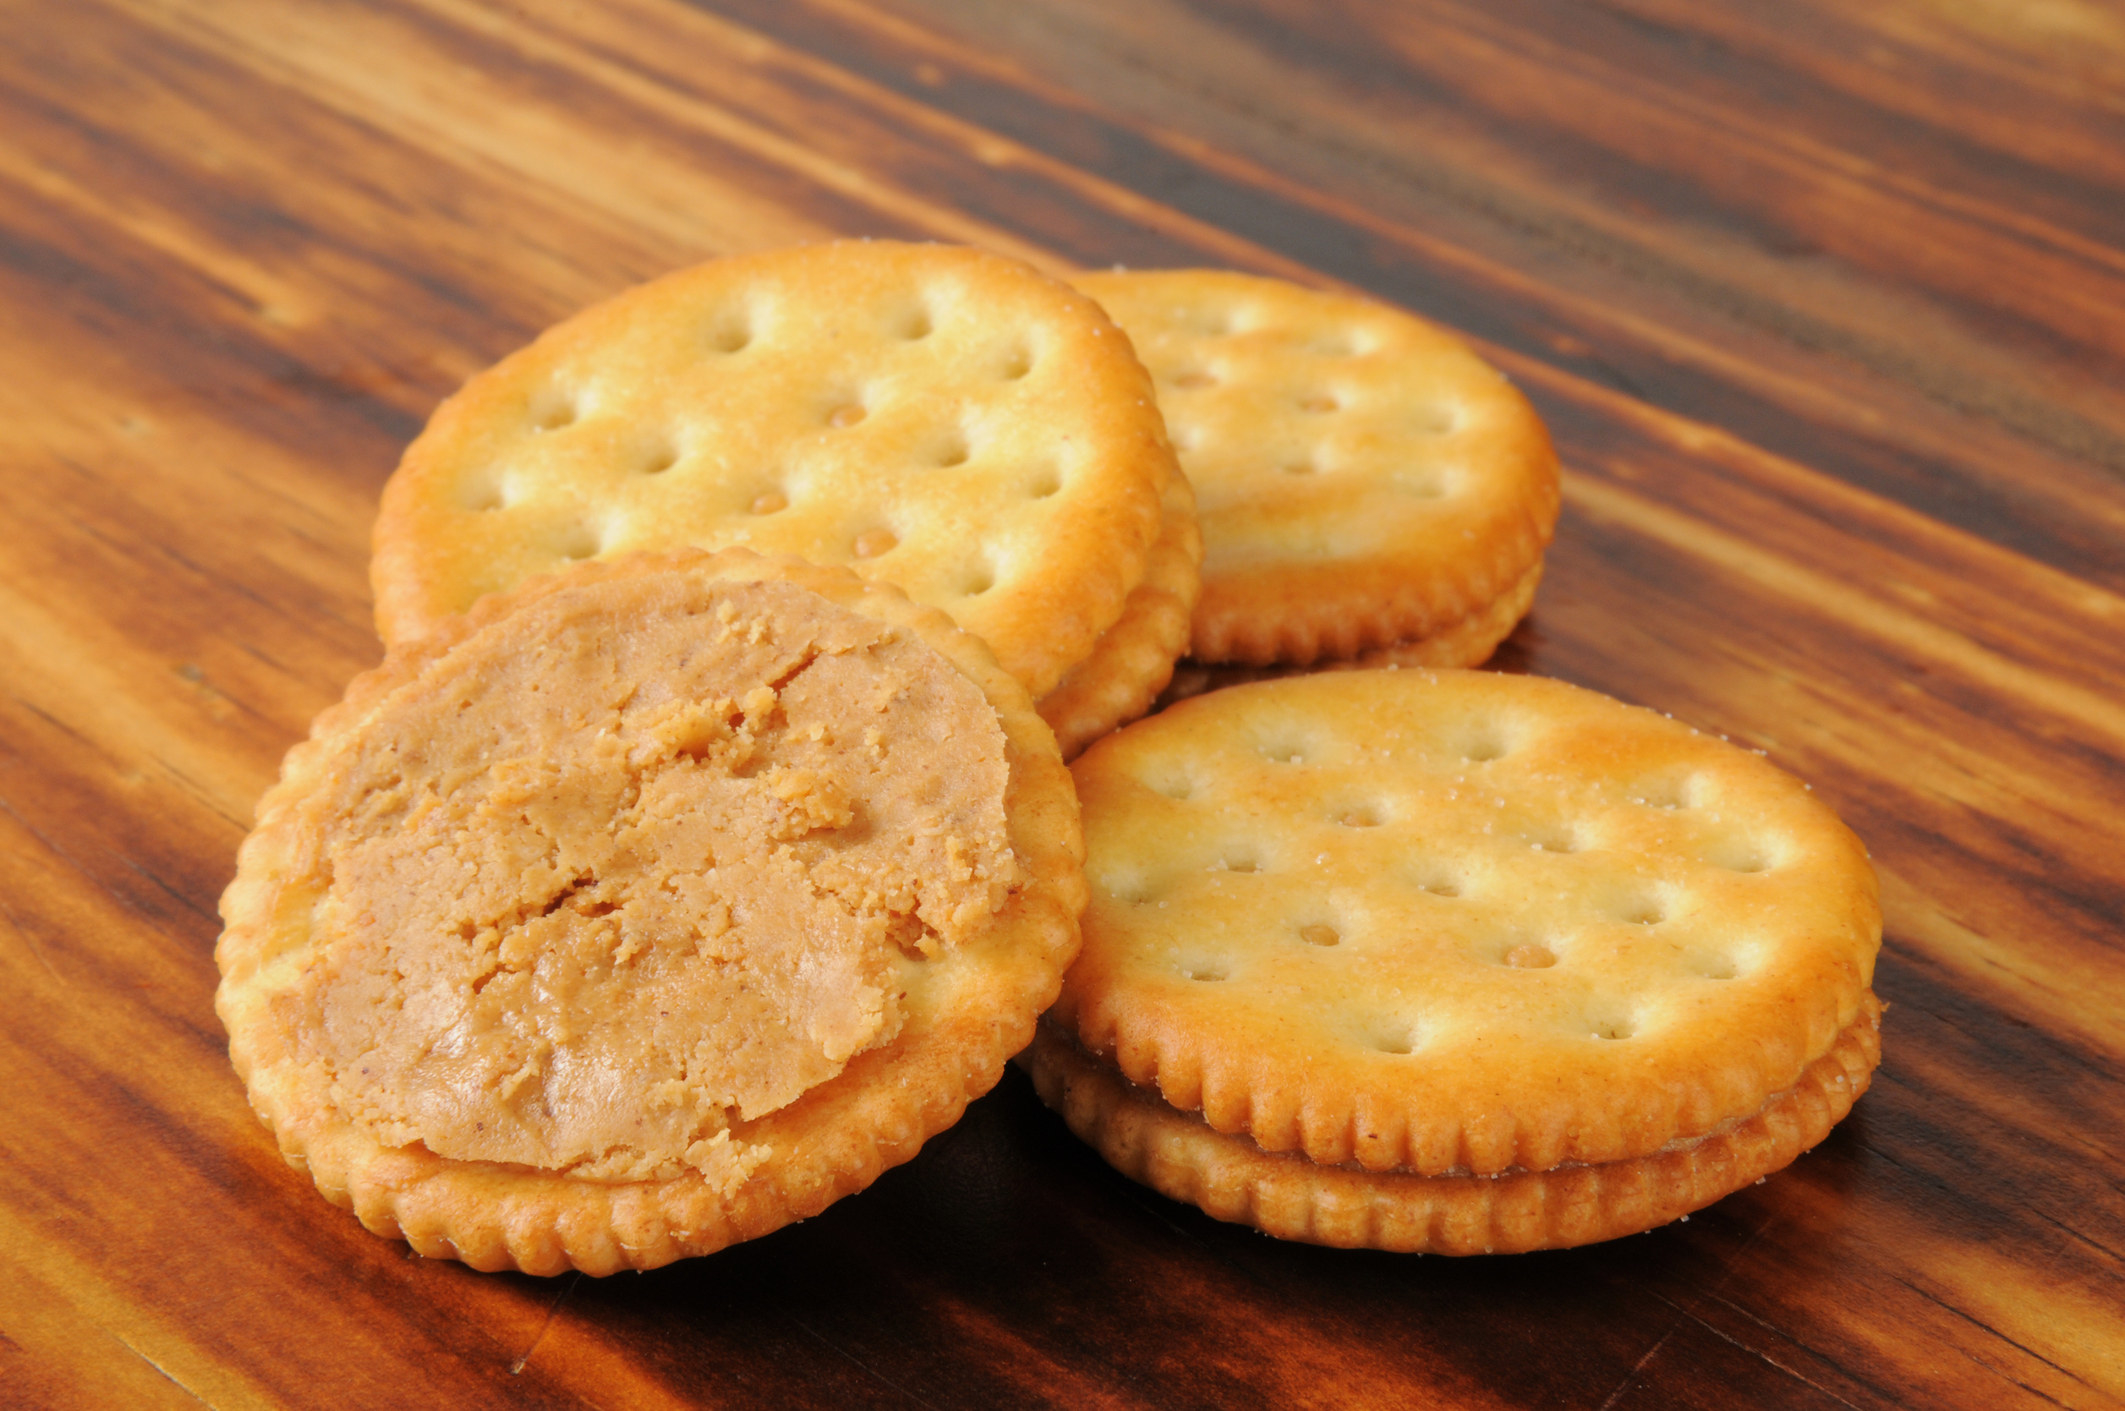 Peanut butter on crackers